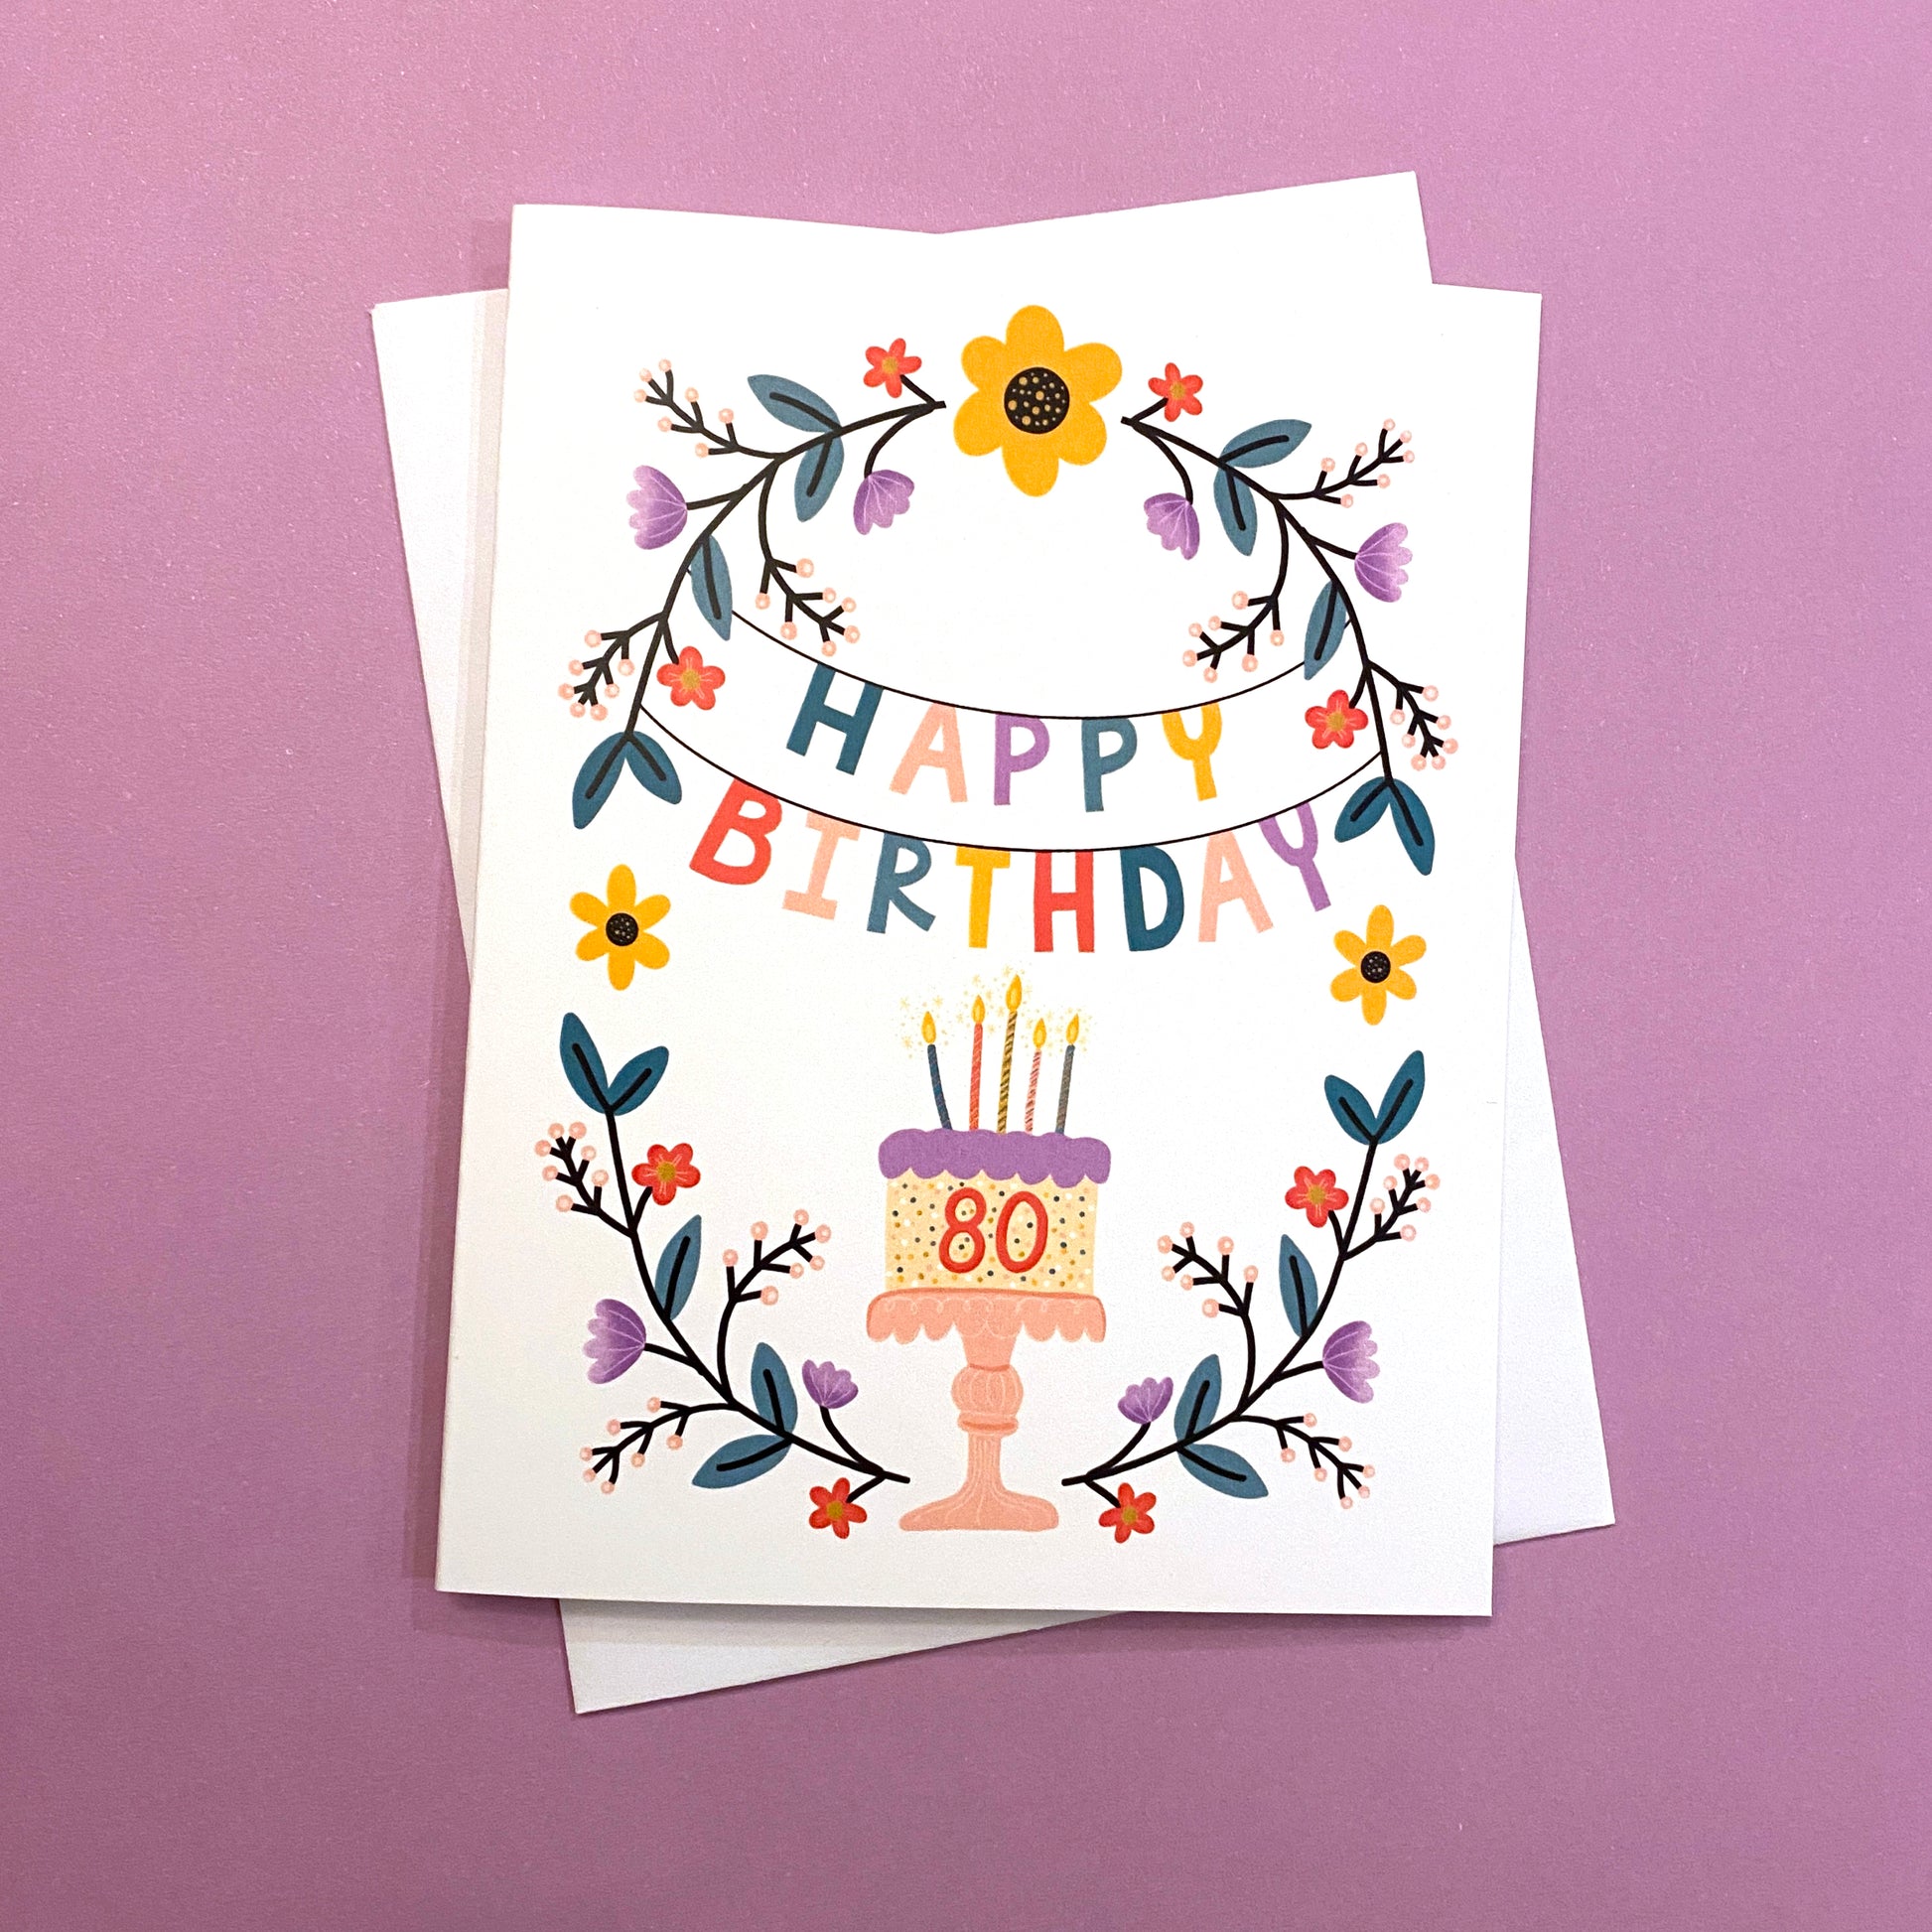 80th Birthday Card with beautiful floral design and birthday cake. Size A2 greeting card (4.25" x 5.5") with envelope, blank Inside. All cards are designed and Illustrated with love by me, Anna Fox, and are printed at my friendly neighborhood print shop in Denver, CO.